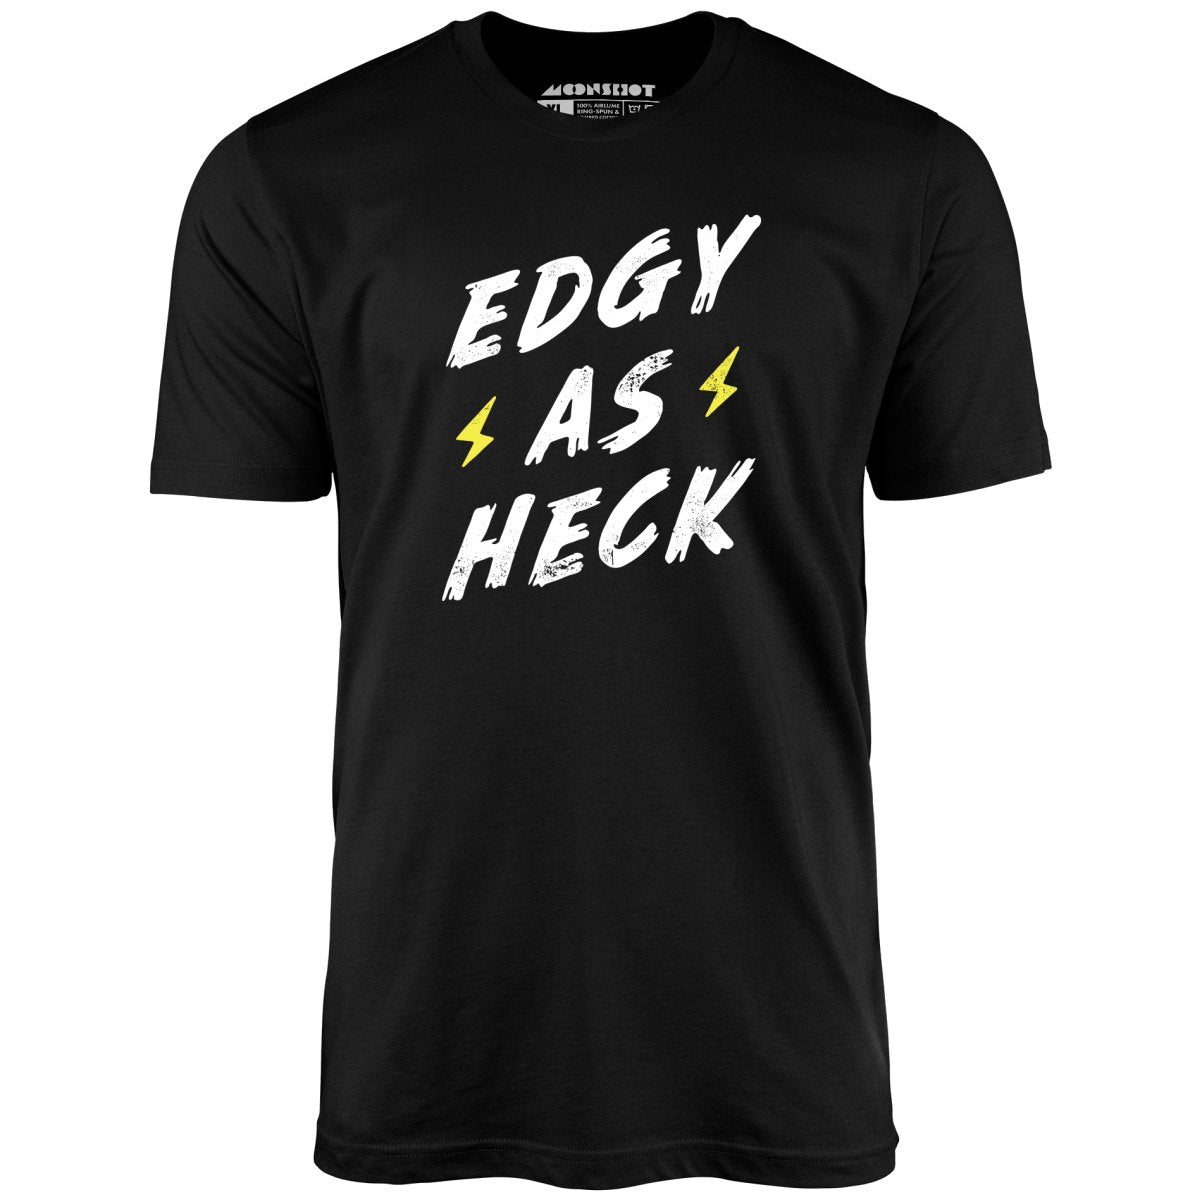 Edgy as Heck - Unisex T-Shirt